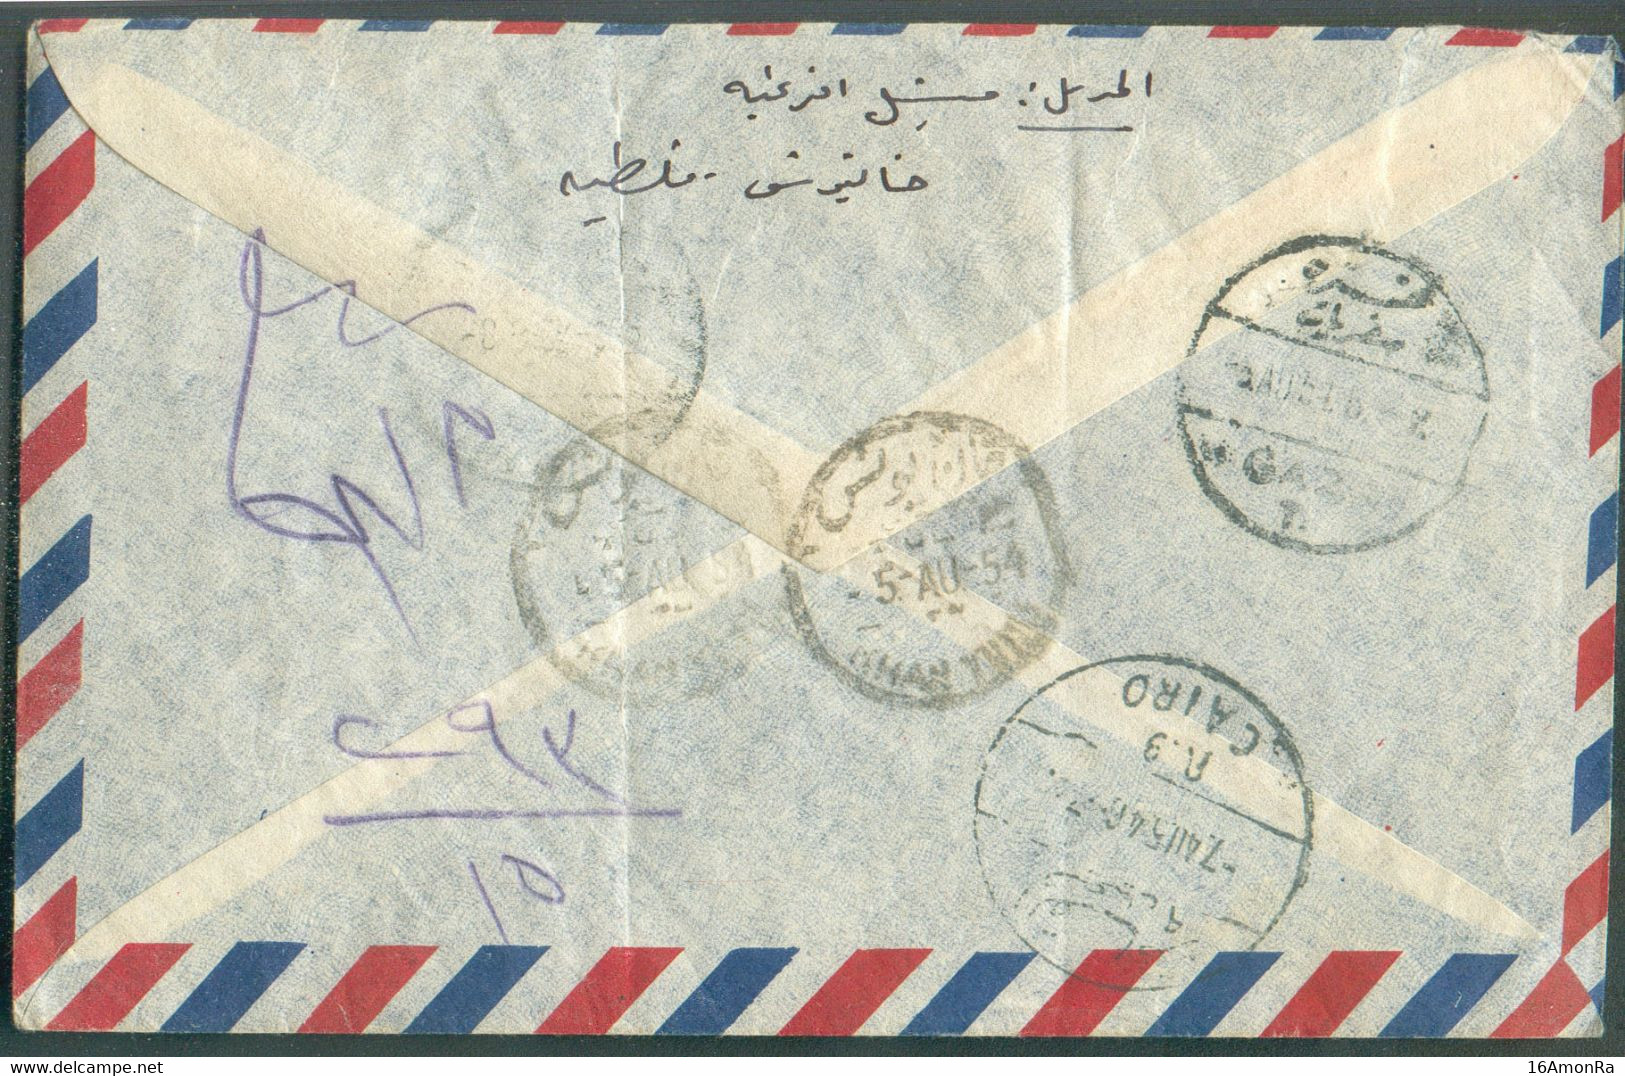 Poste Aerienne Stamps Of KING FAROUK 2, 3, 10 Et 20 Mills. Ovpt. PALESTINE Canc. KHAN YUNIS On Cover 5 August 1954 To Ca - Poste Aérienne